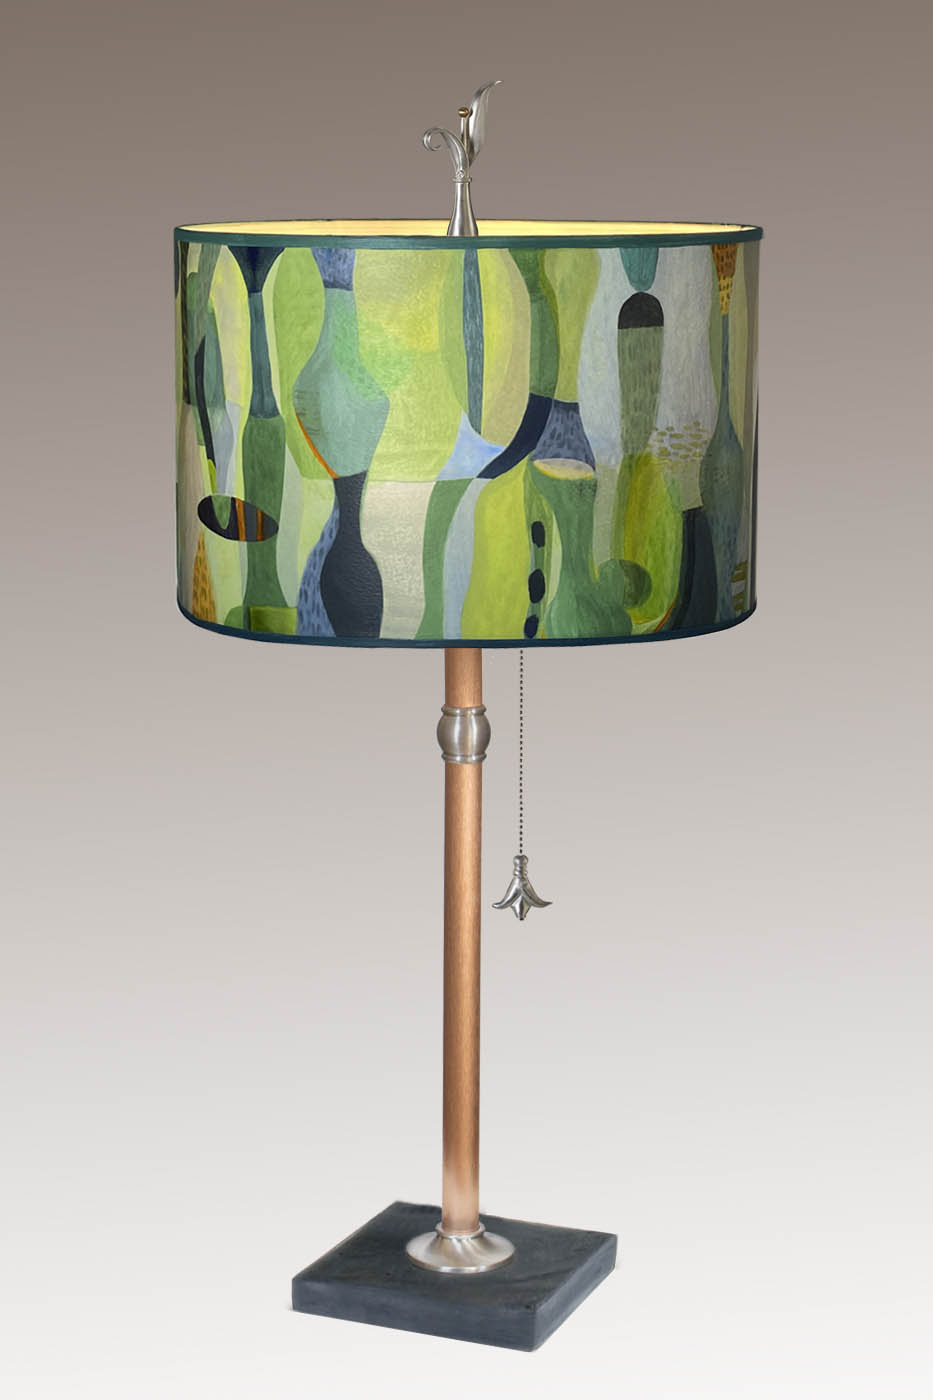 Copper Table Lamp with Large Drum Shade in Riviera in Citrus